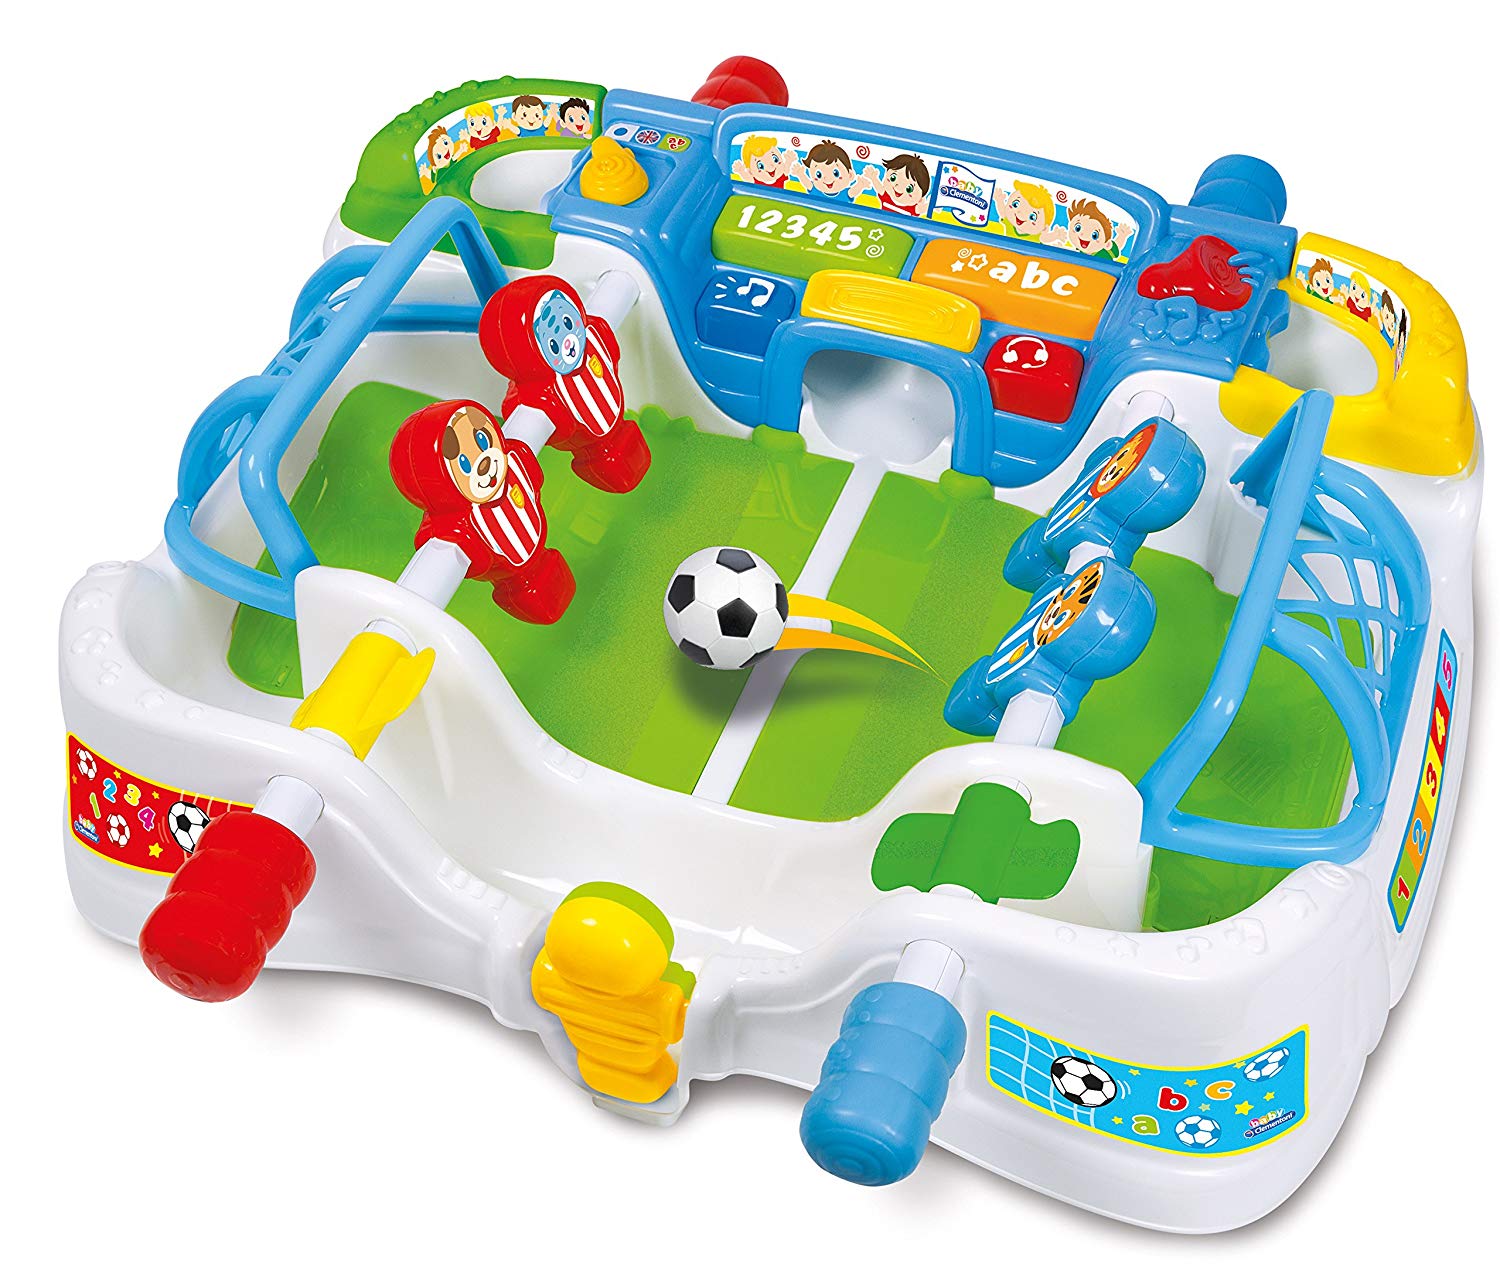 Clementoni Baby Tabletop Football Game